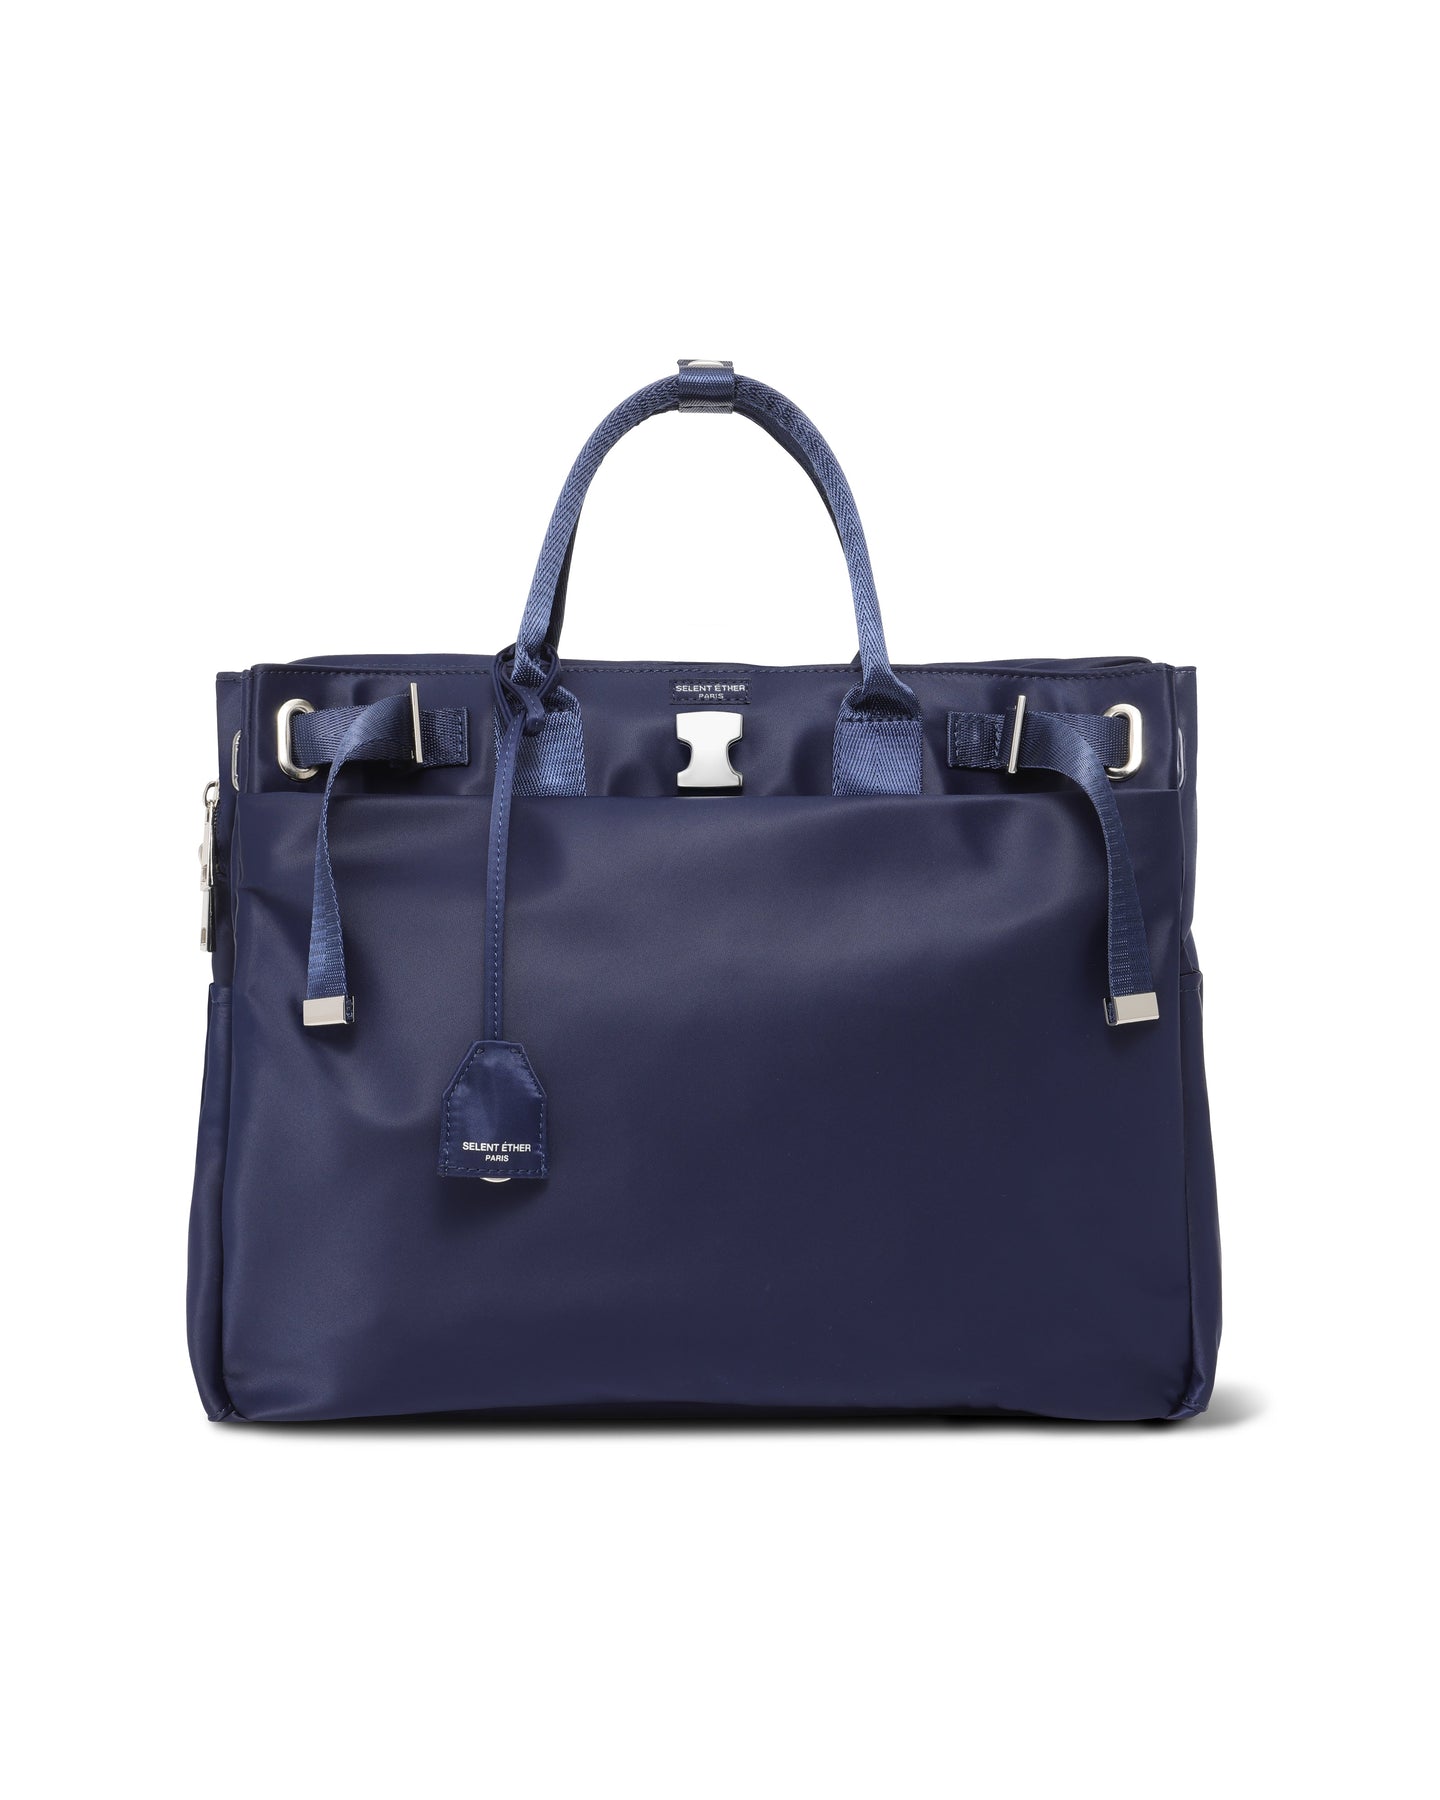 PASSION36 NAVY – SELENT ETHER_Japan